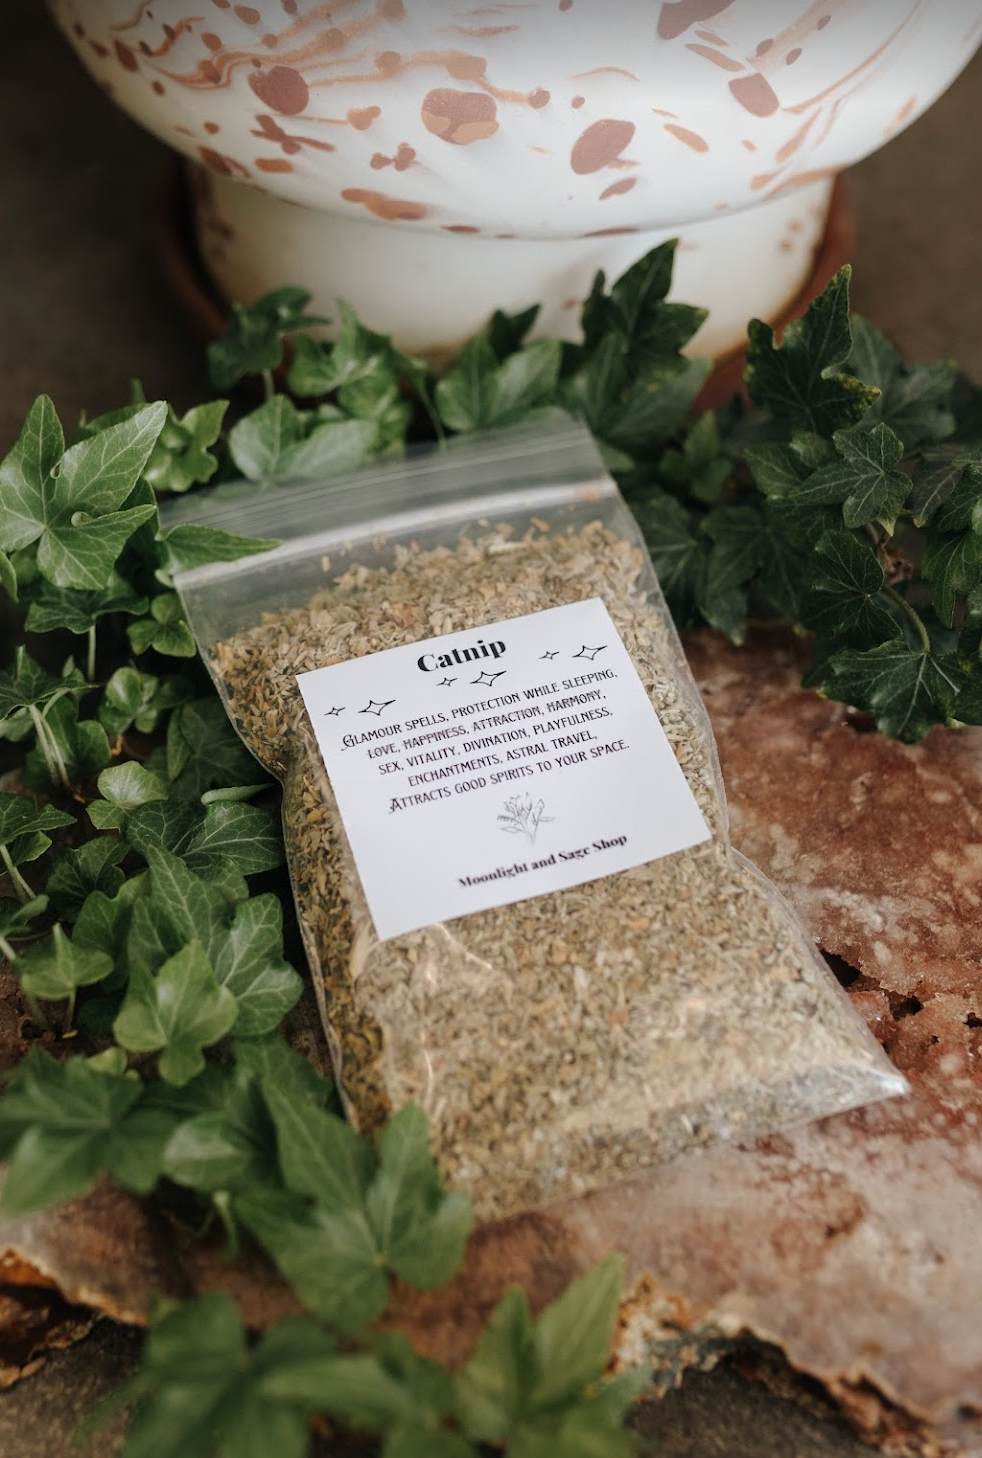 Catnip Herb (Happiness, Harmony, Attraction, Glamour Spells, Divination)